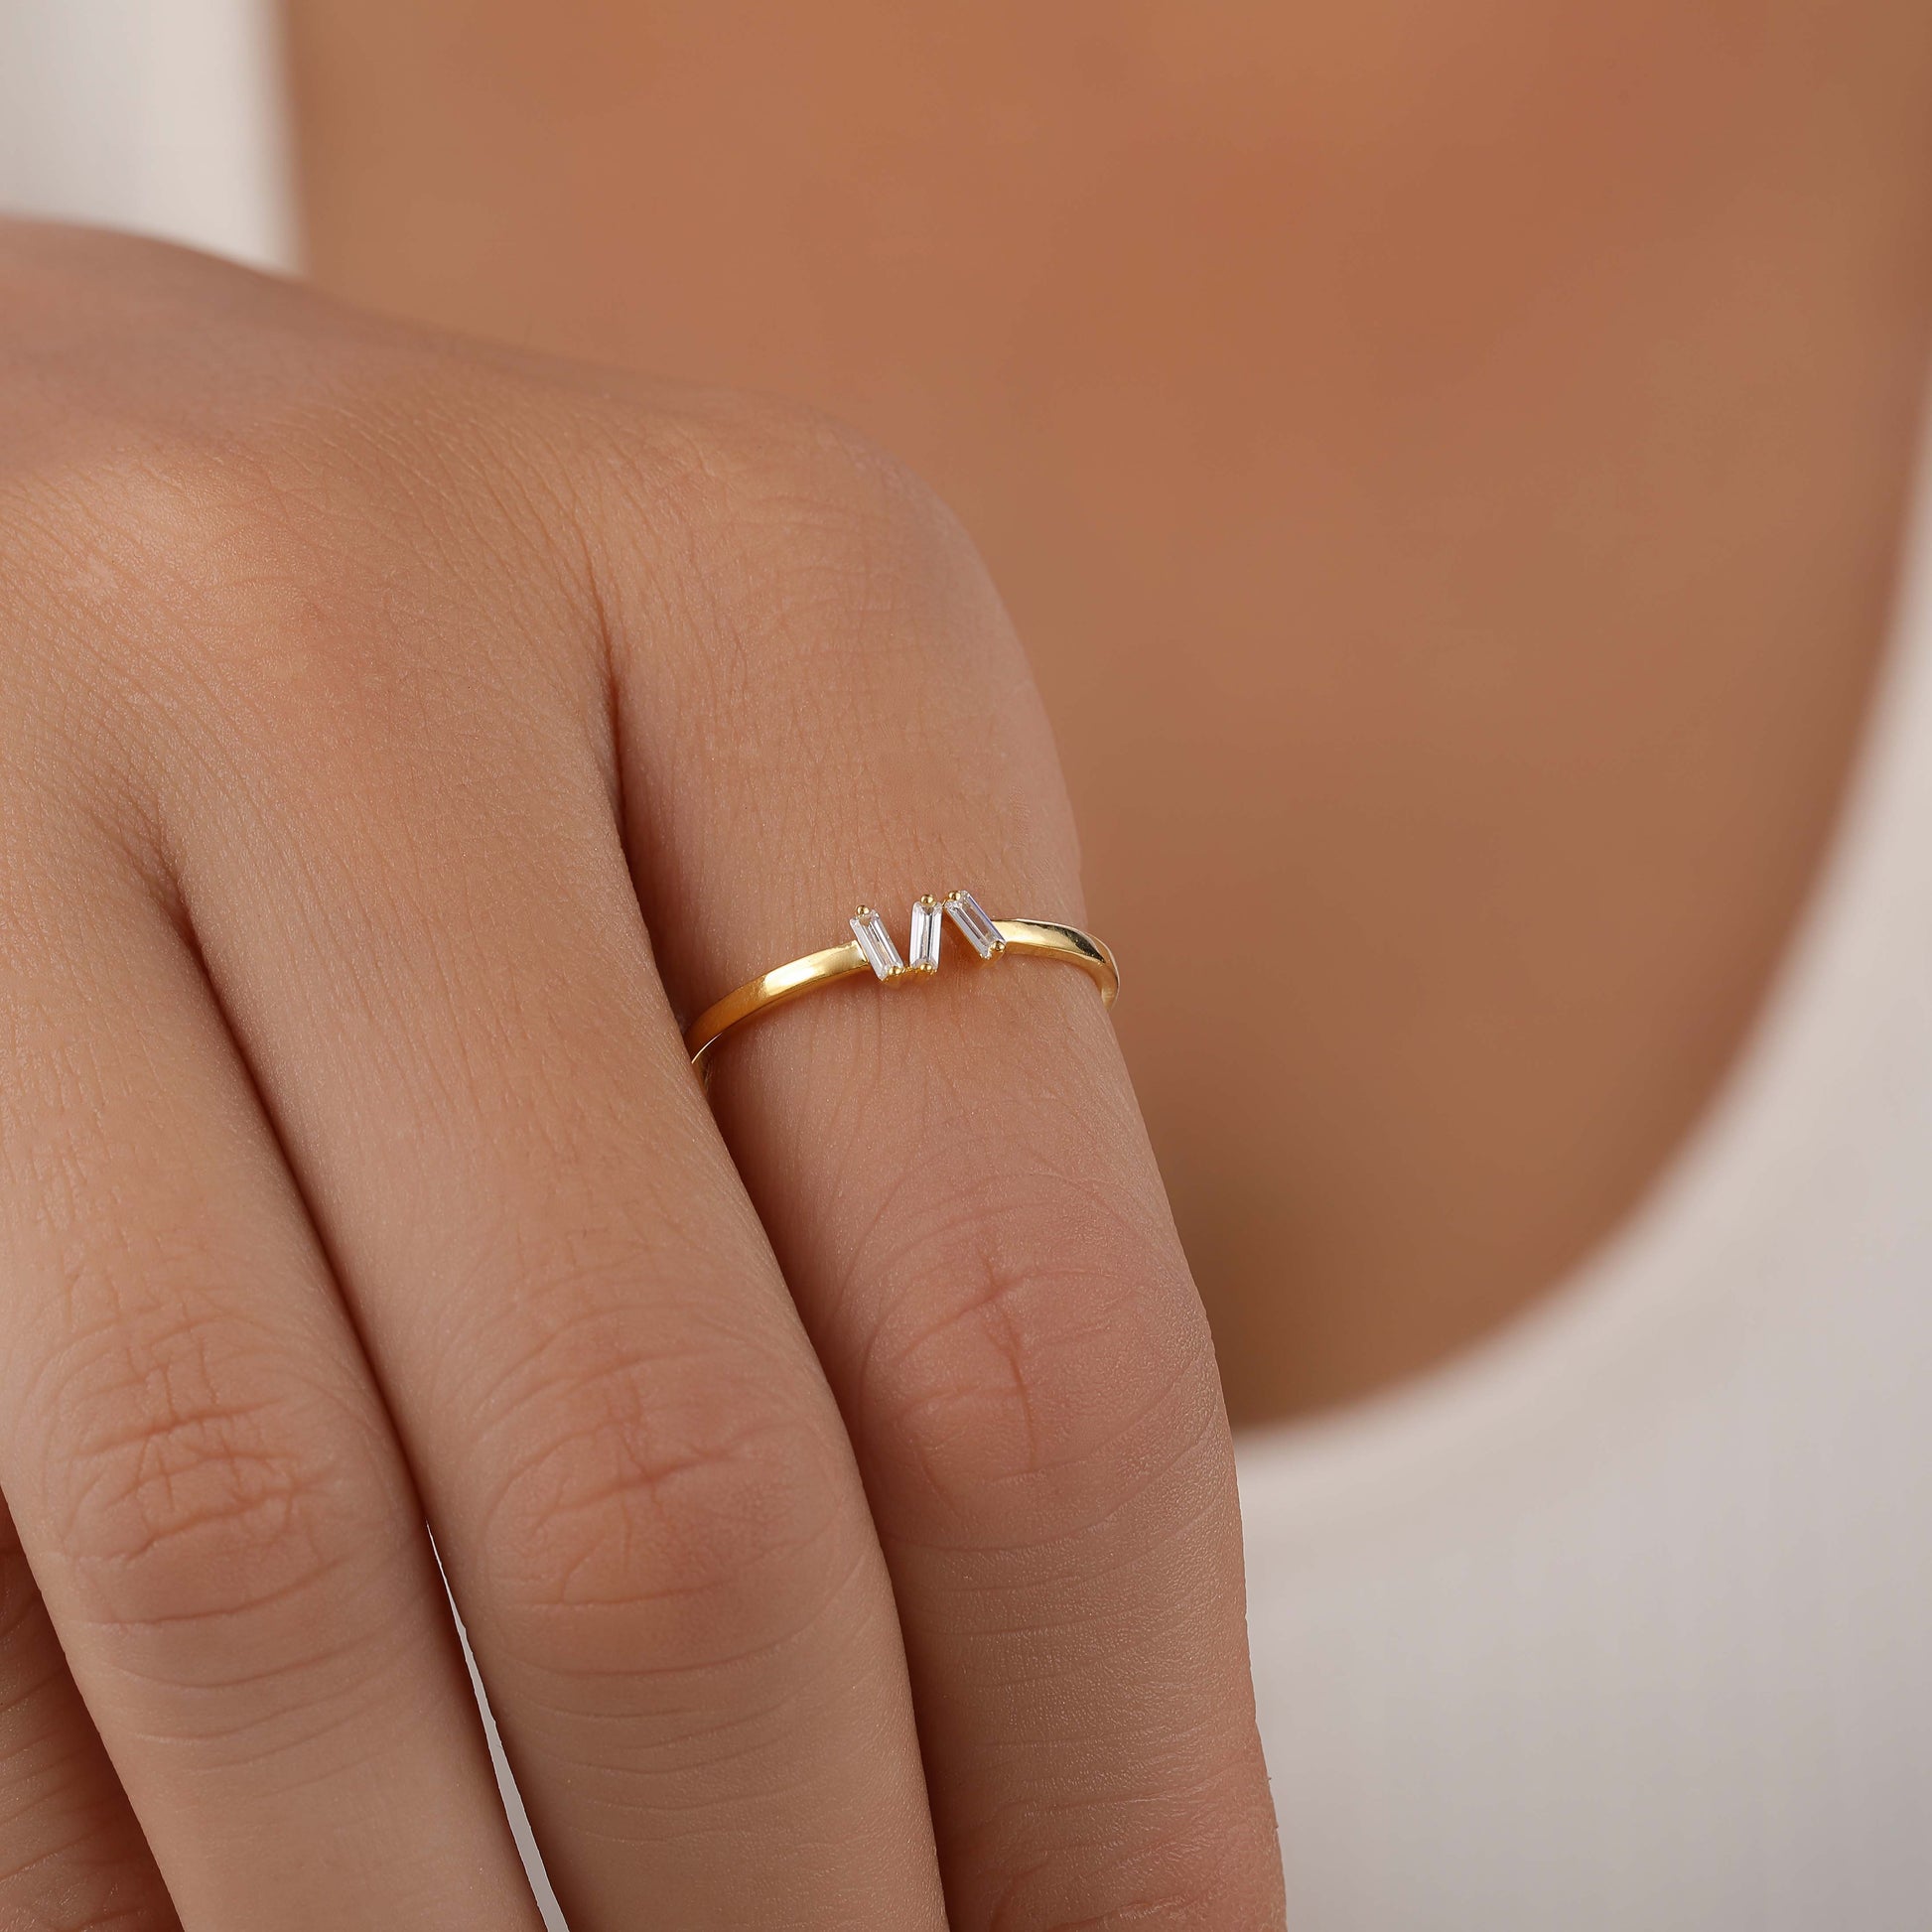  Baguette Stacking Ring on her hand